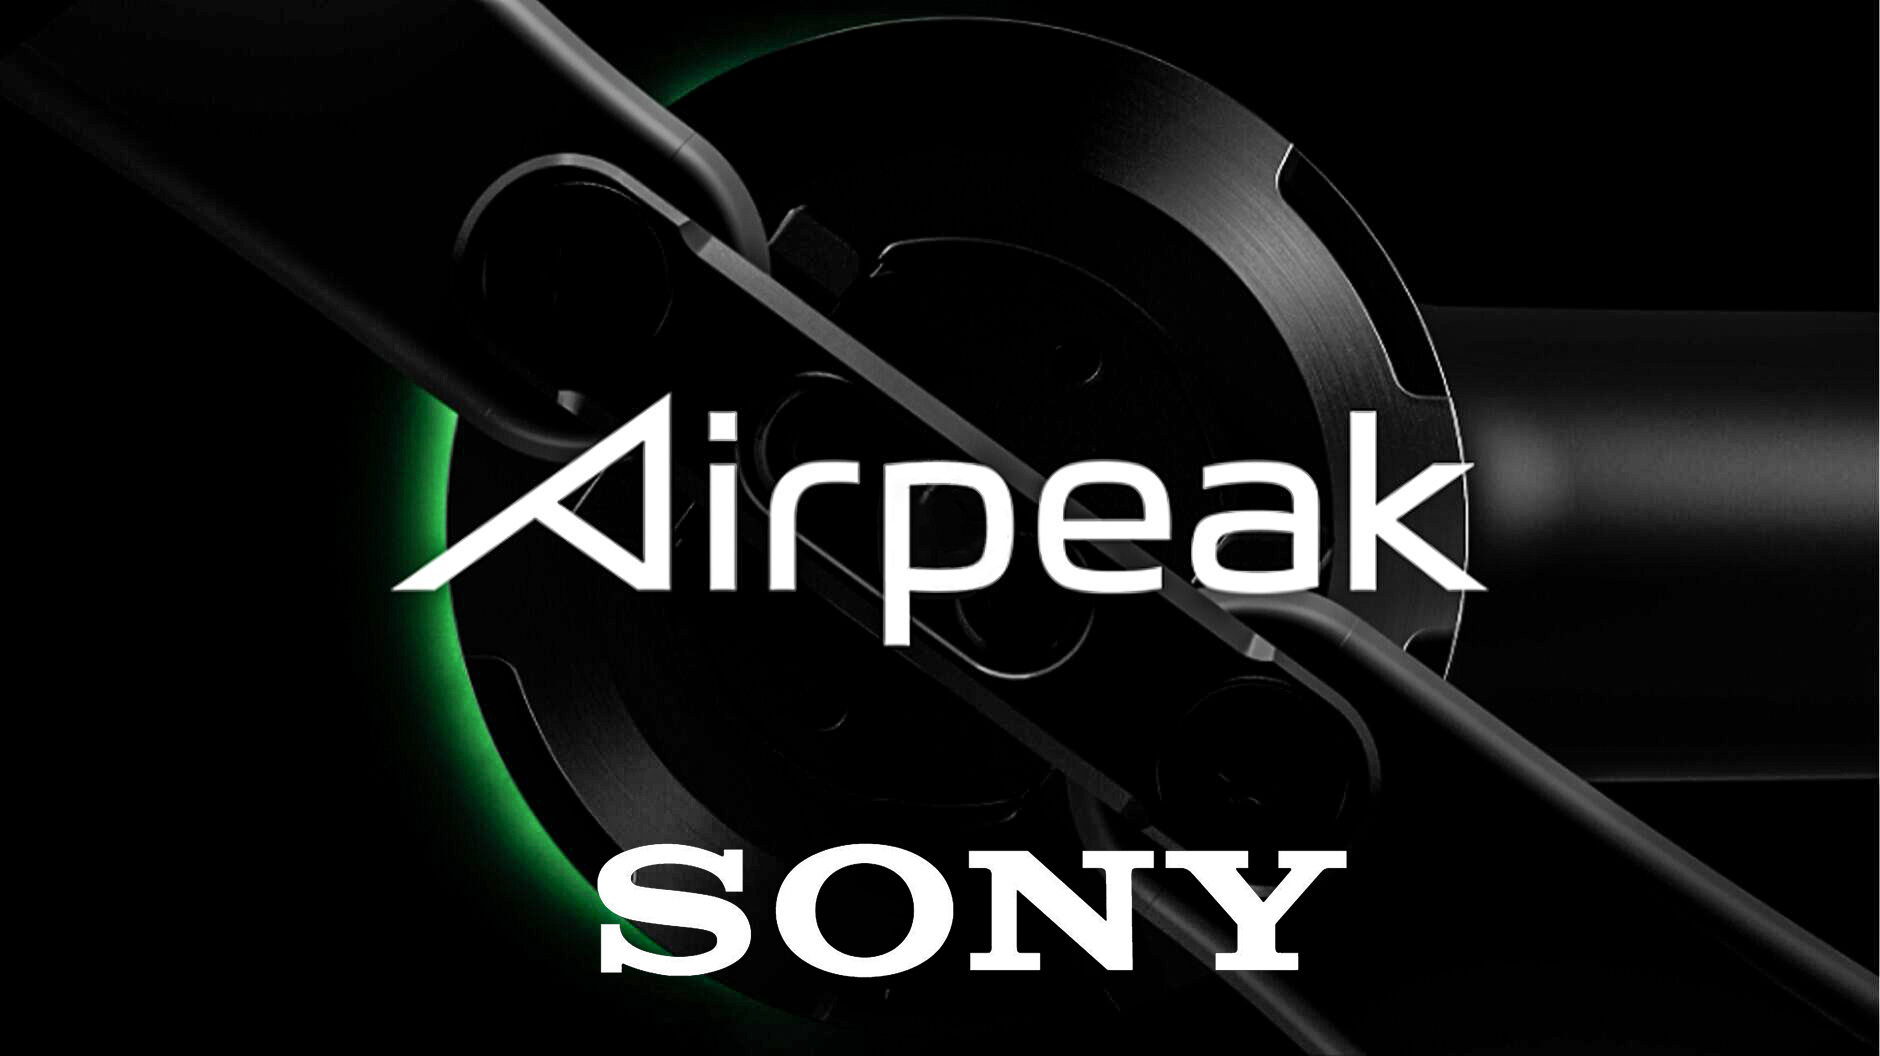 Sony joining drone market in spring 2021 with Airpeak | Digital Camera World